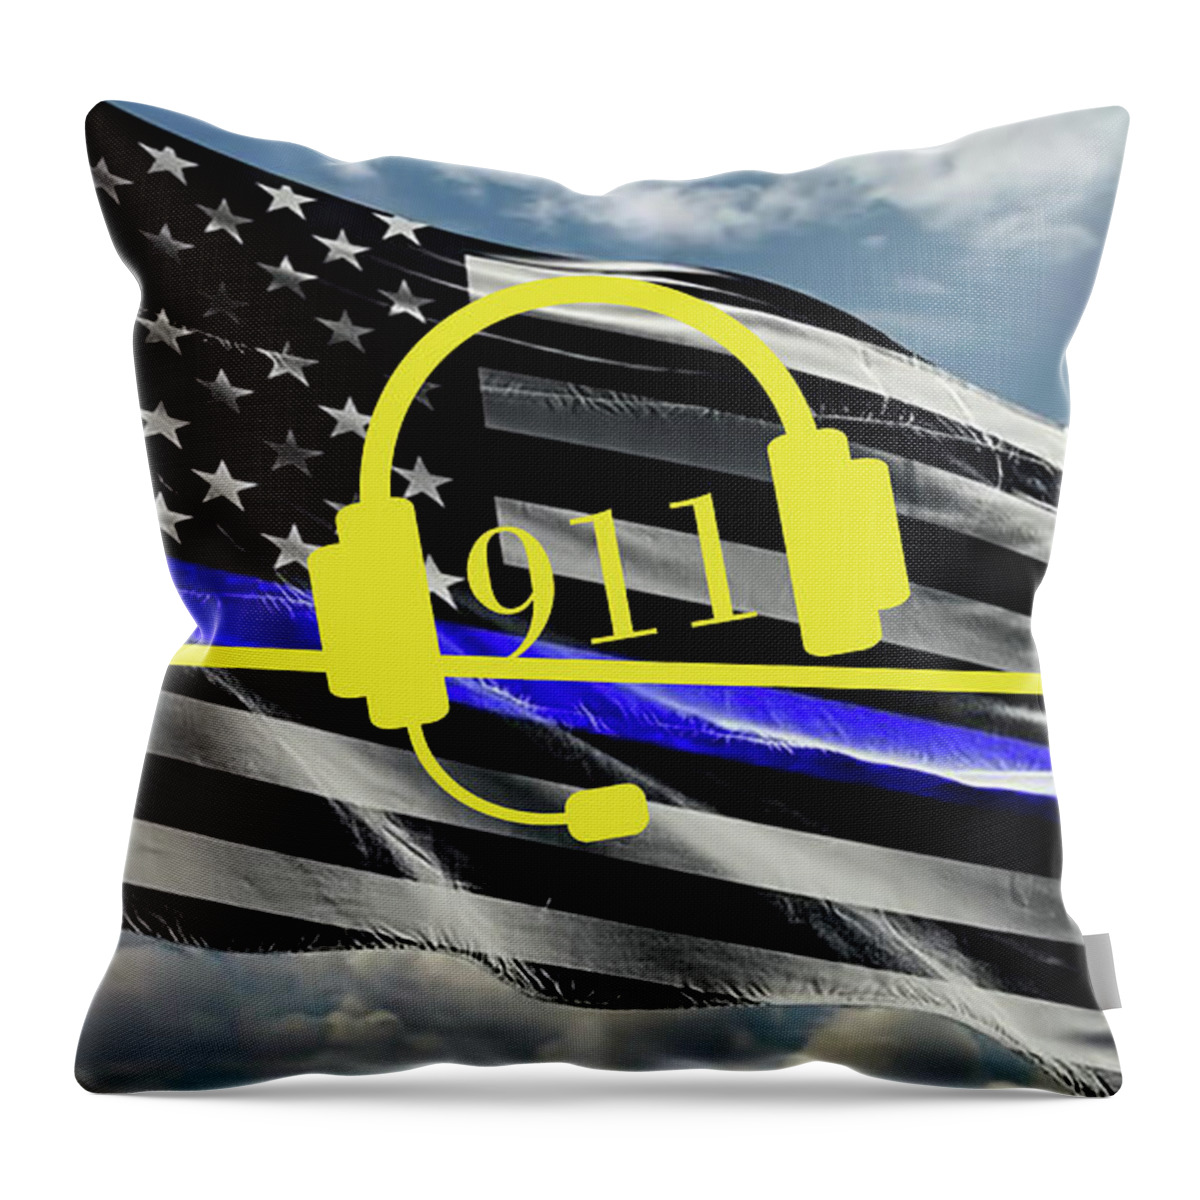 911 Throw Pillow featuring the digital art The Thin Gold Line 911 by D Hackett